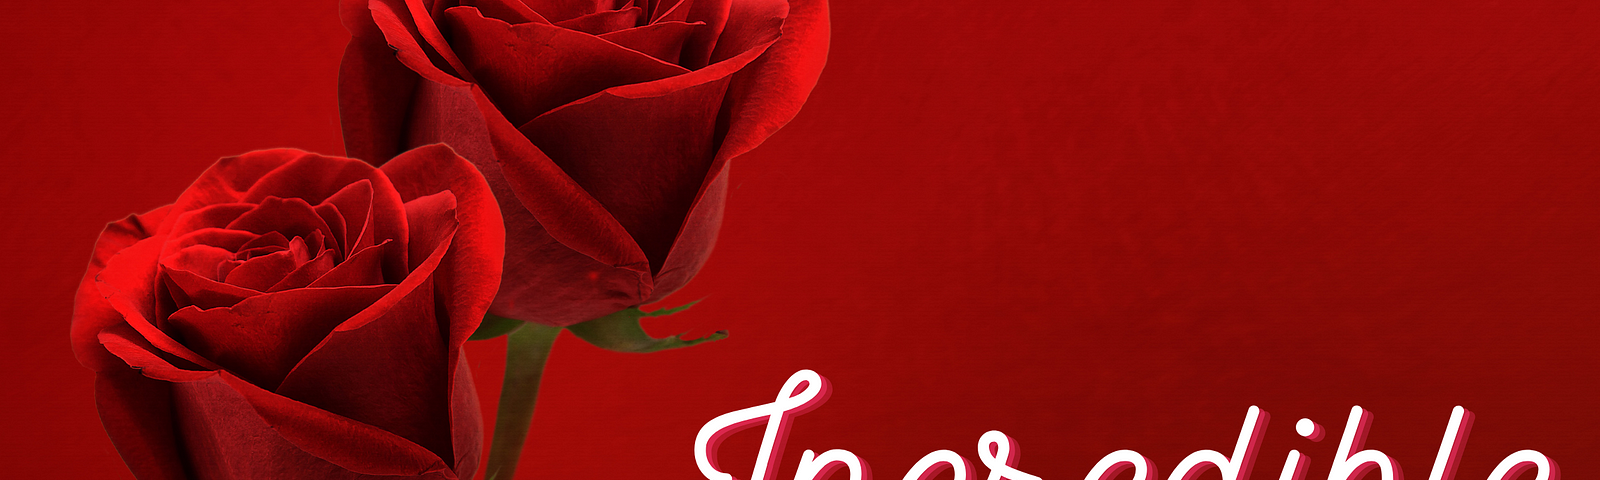 Two Red roses on a red background with the title “Incredible Red”